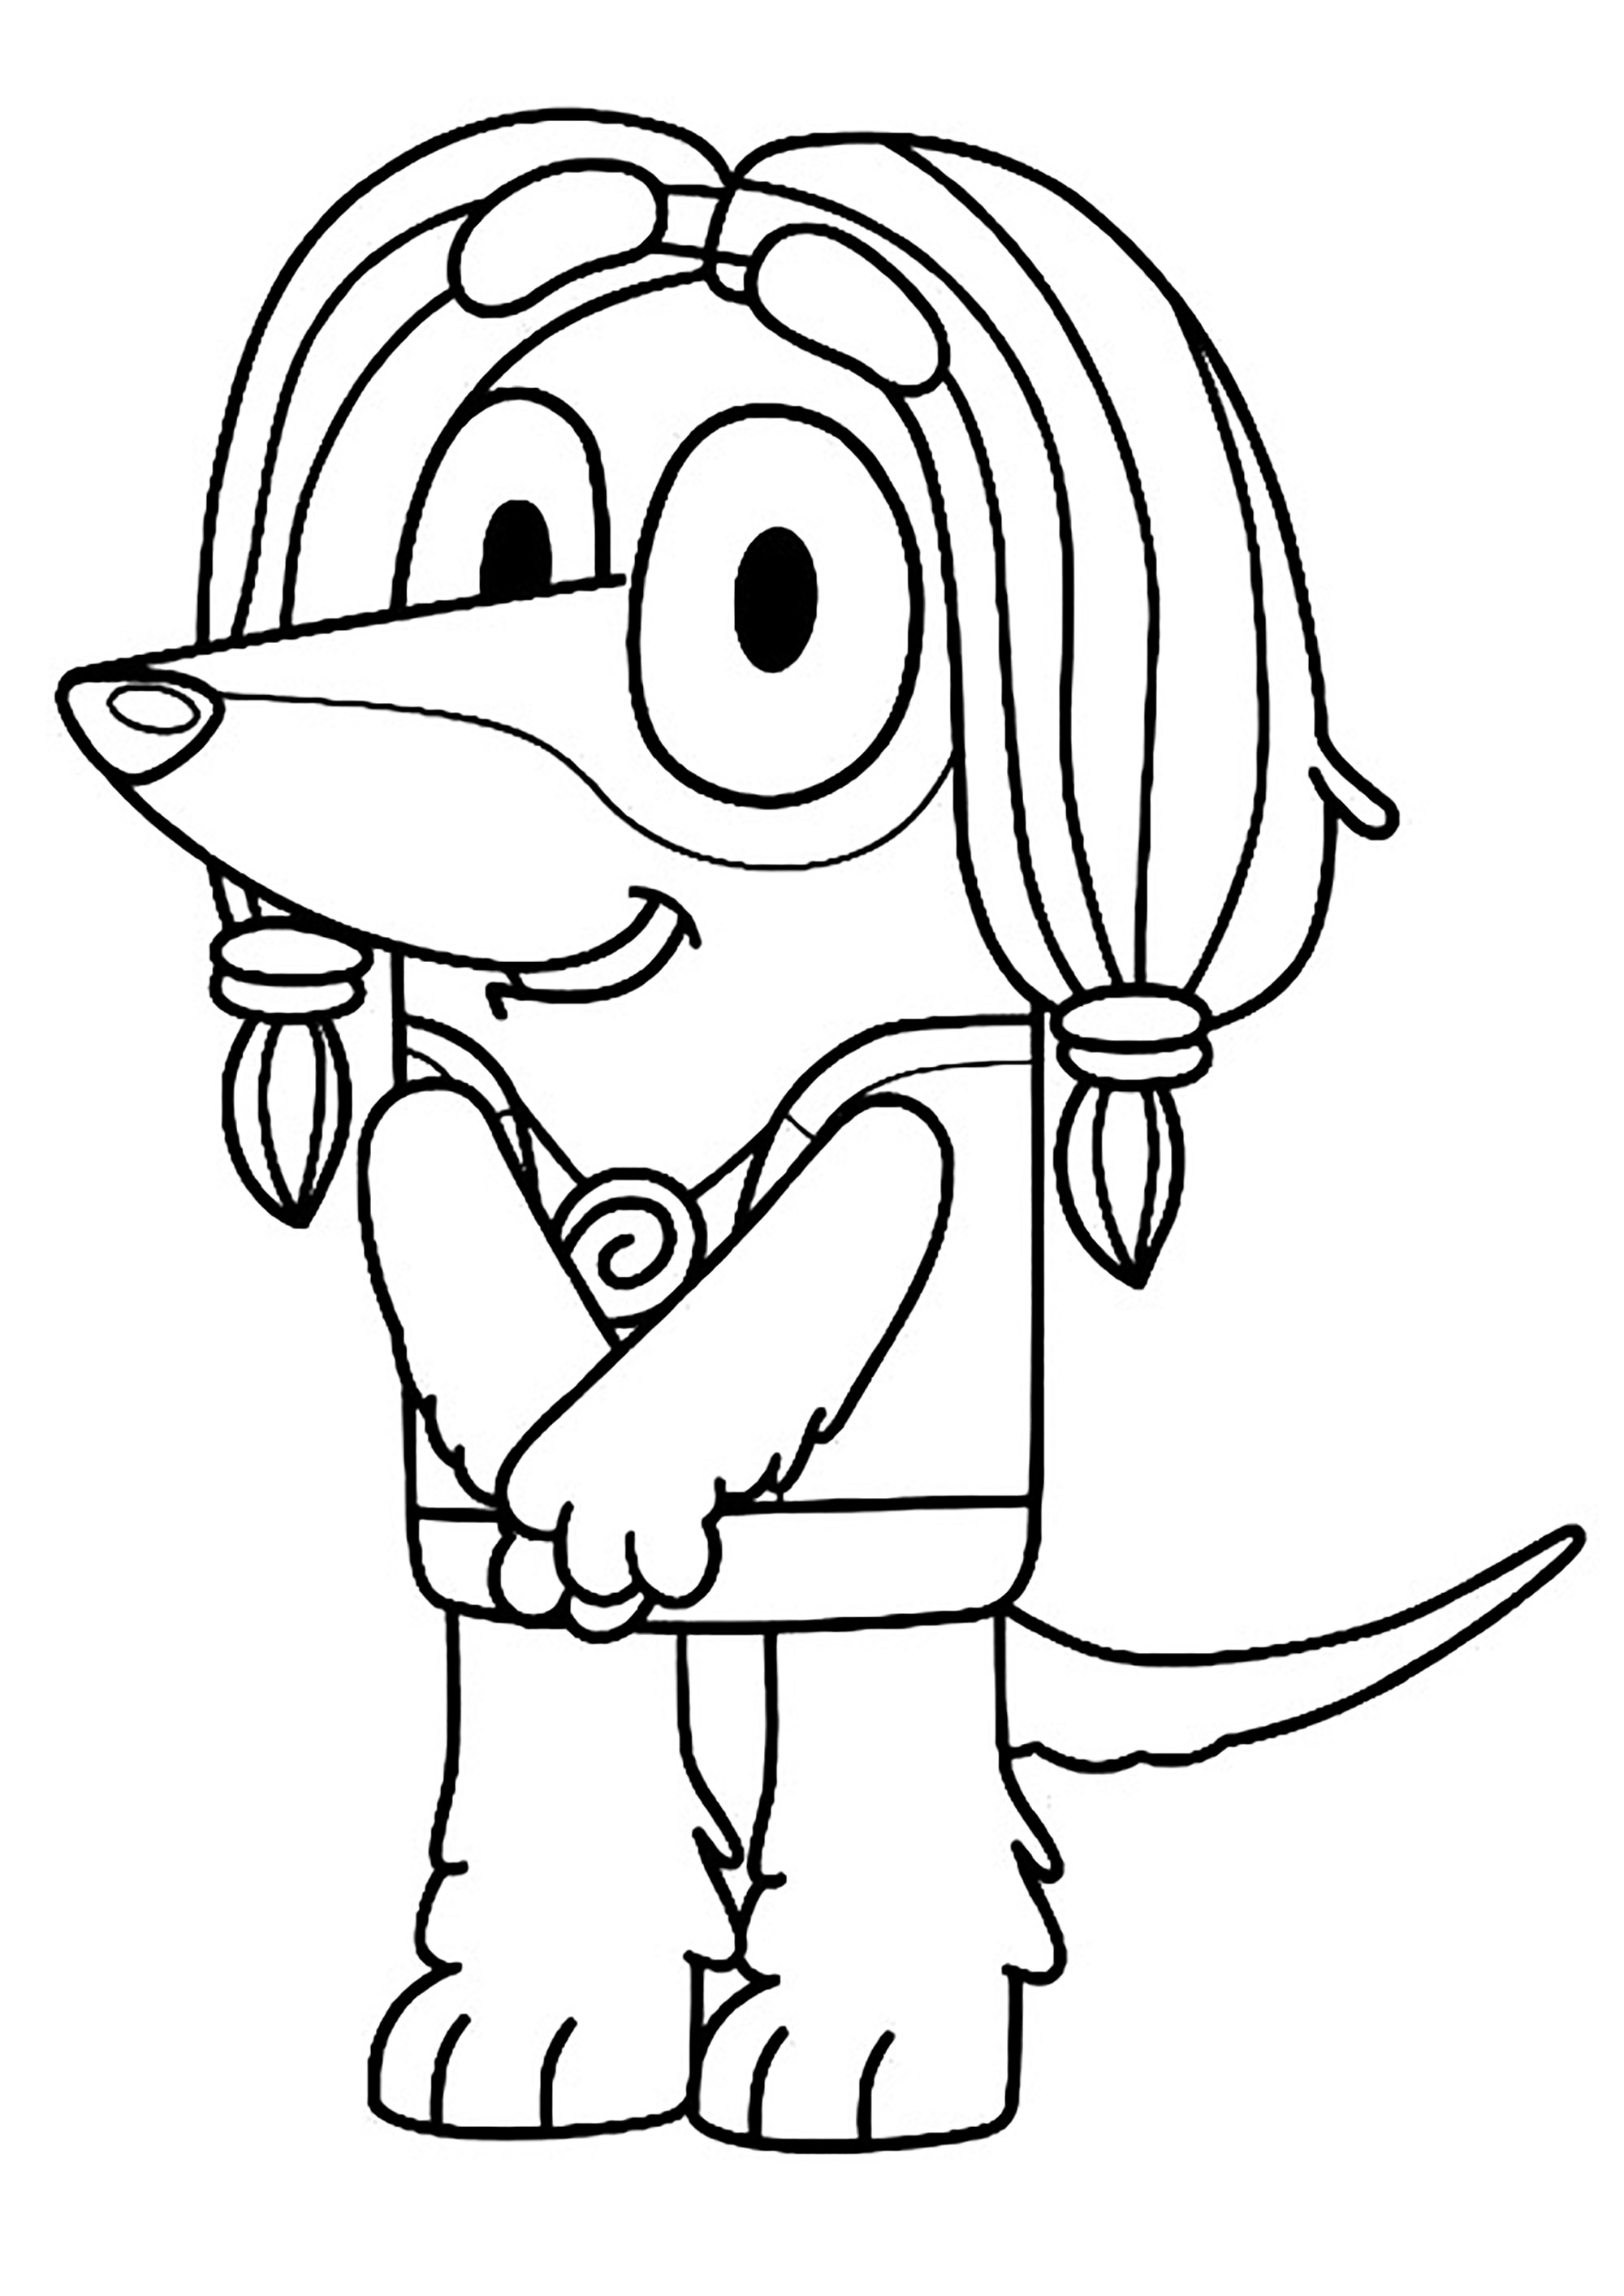 Coloring page with Bluey: Indy